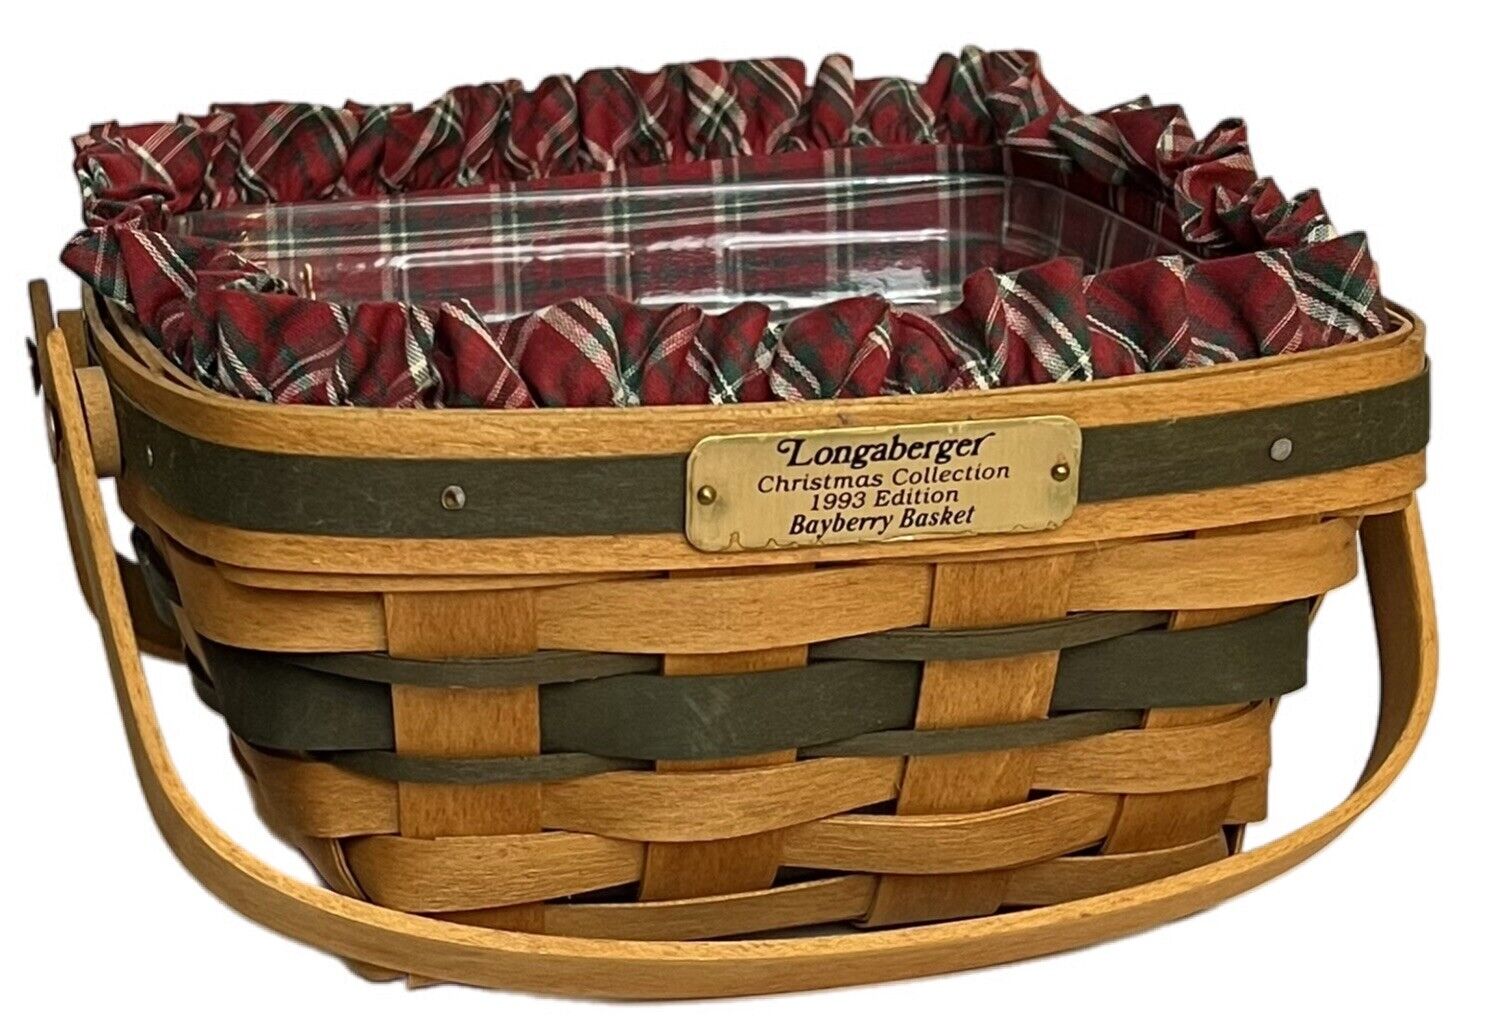 Longaberger Green Christmas Bayberry Basket 1993, Plaid Tidings Liner, Protector